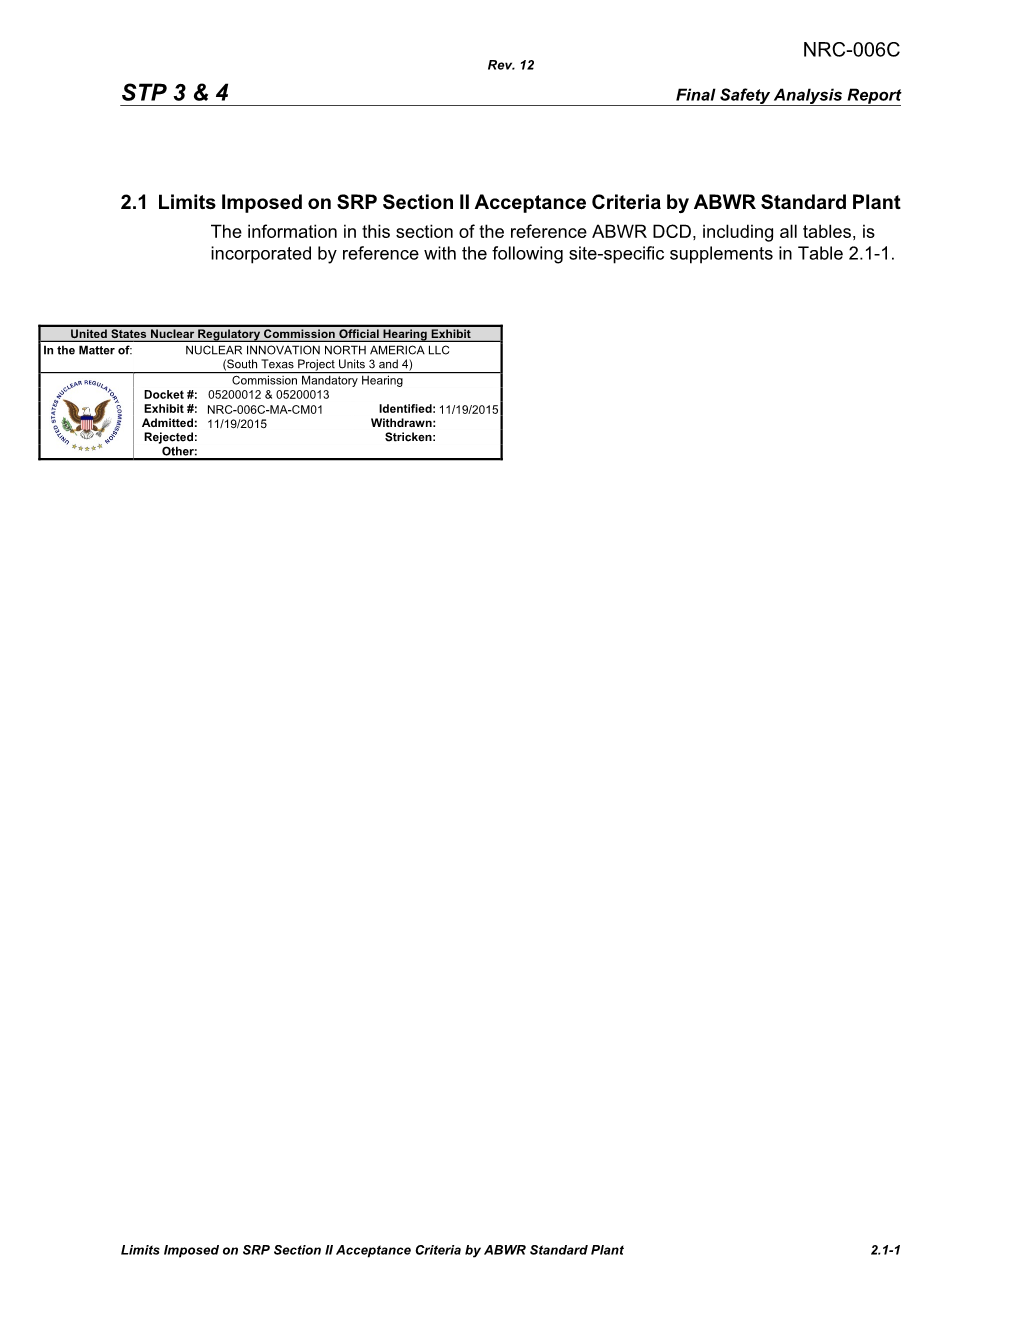 South Texas Project, Units 3 and 4, Combined License Application Rev